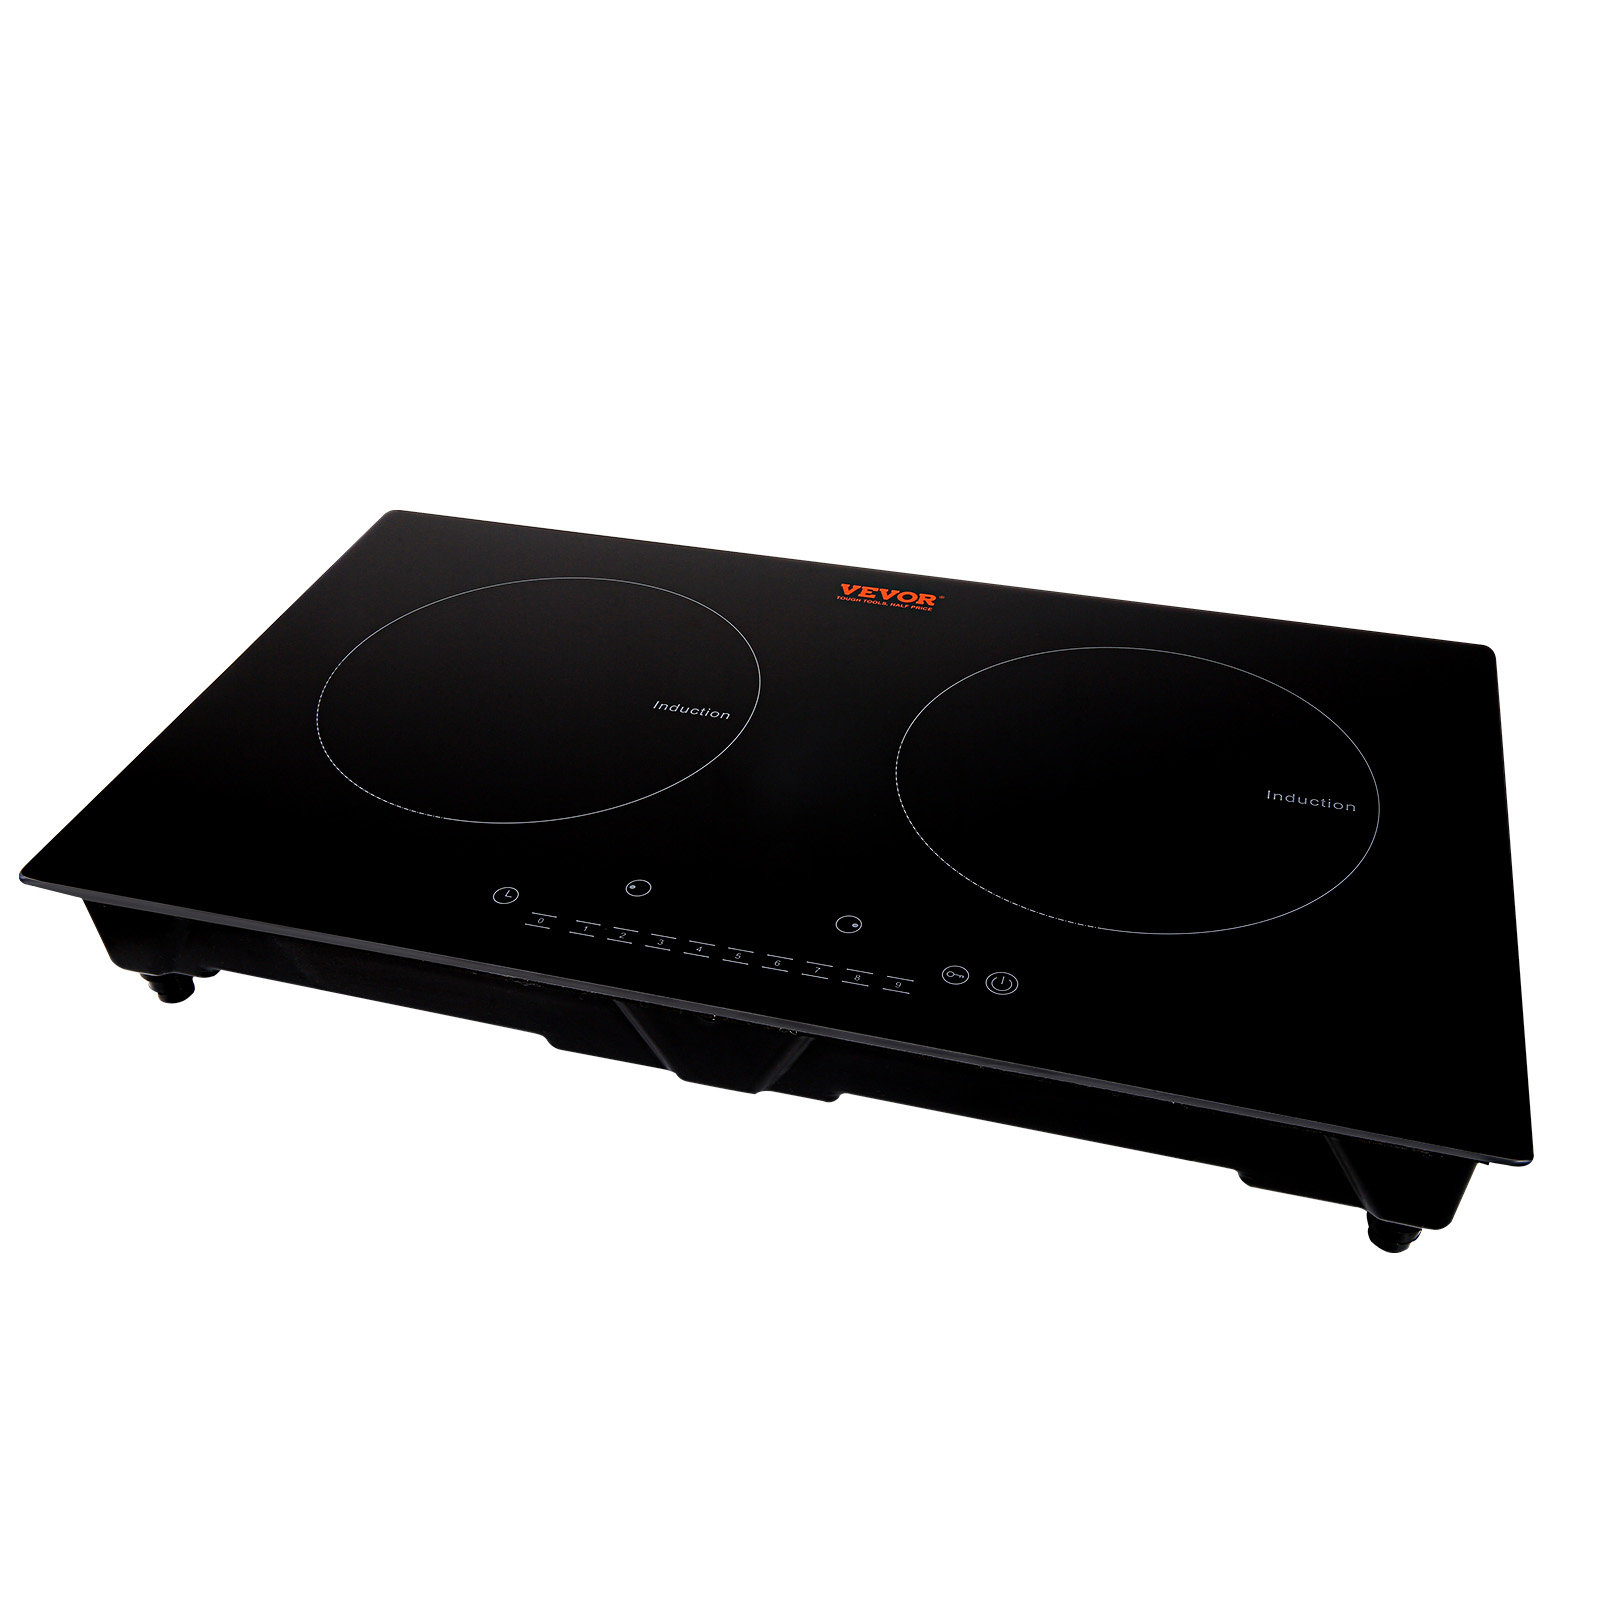 600W/120V Mini Induction Cooktop Countertop Burners Hot Plate